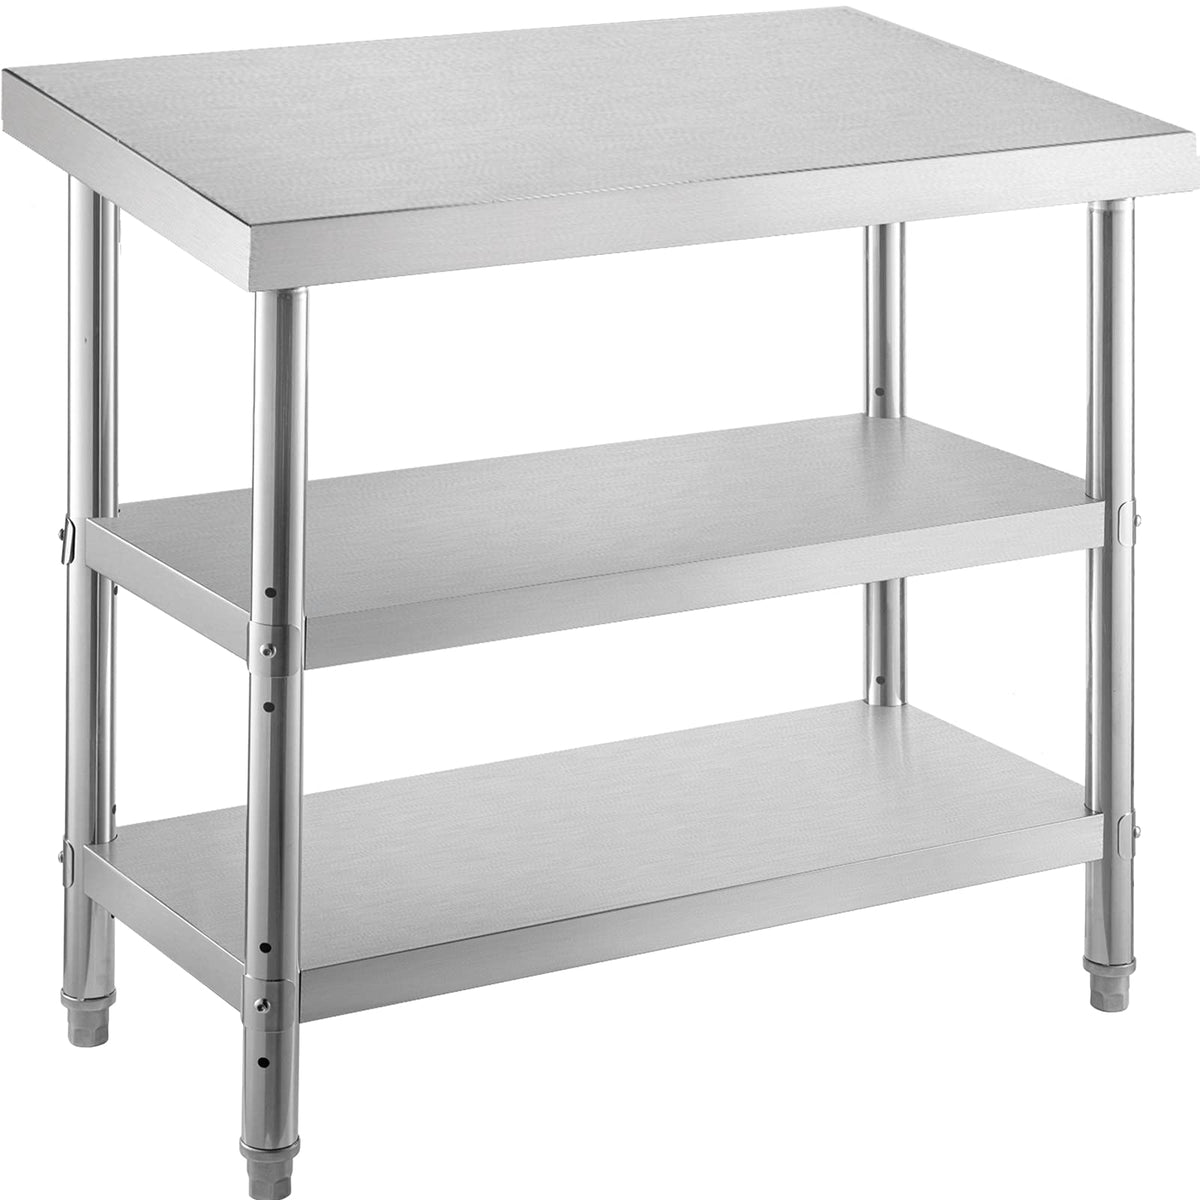 VEVOR 48x18x33 in Commercial Stainless Steel Table